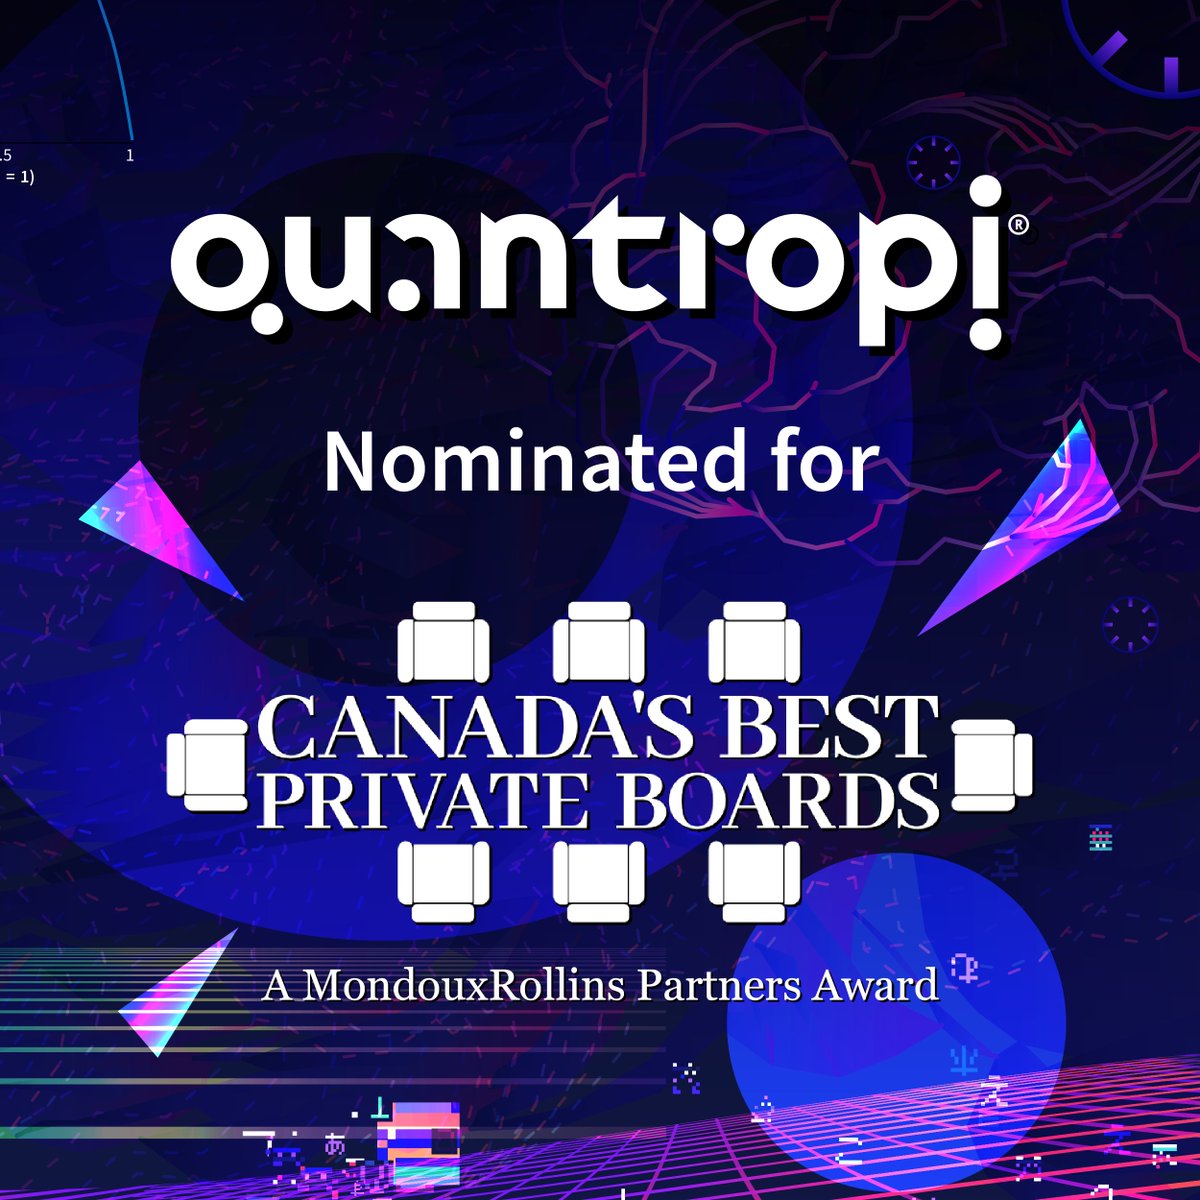 We’re excited to announce that @Quantropi has been nominated for one of Canada's Best Private Boards awards! This nomination is a testament to our commitment to defending Truth and Trust in the $50 Trillion global digital economy. #CanadaBestPrivateBoardsAward #Quantropi